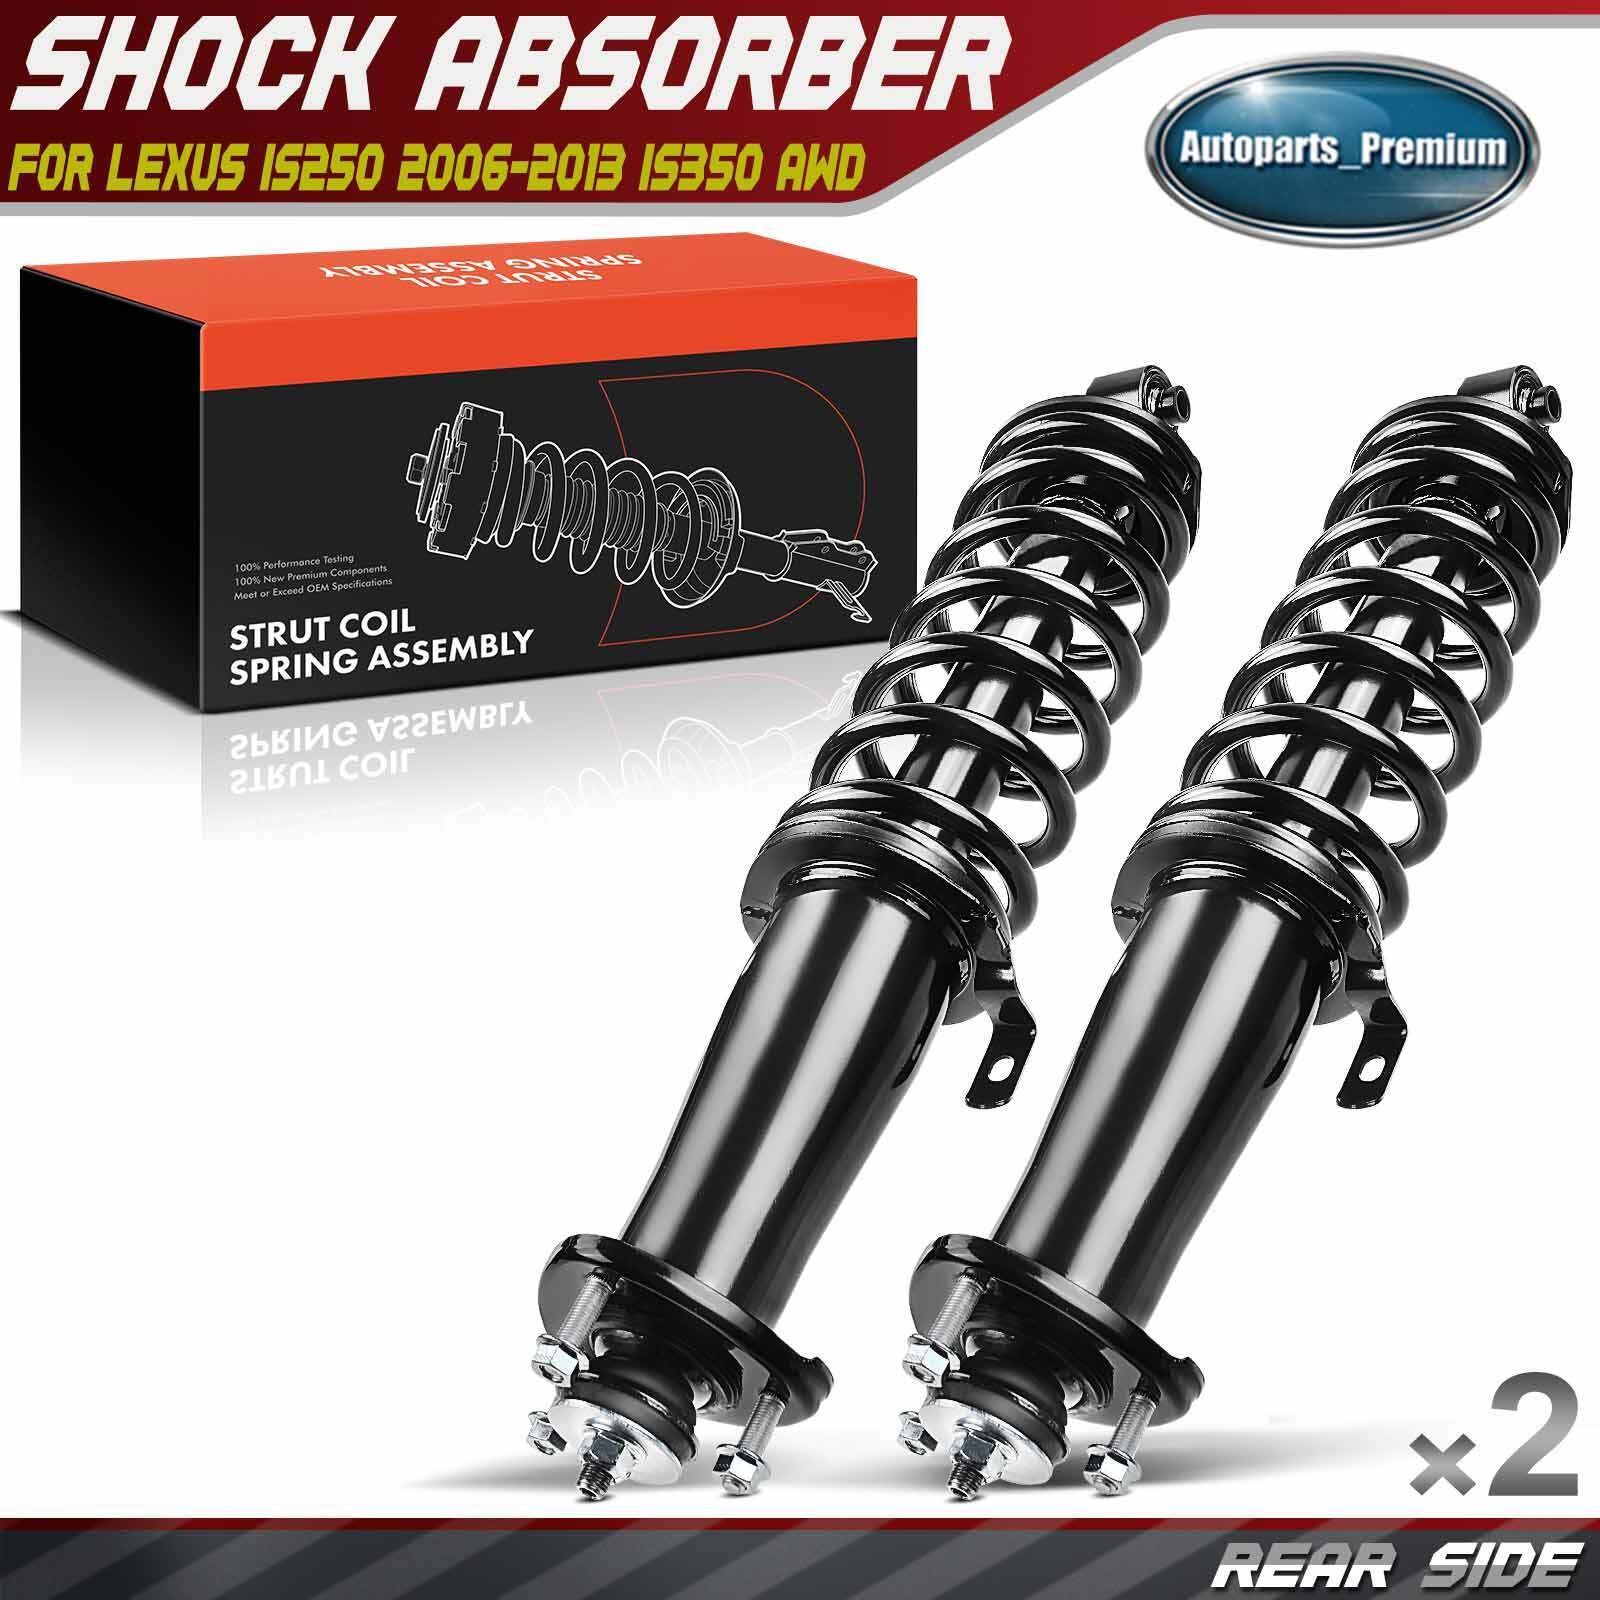 2x Rear Left & Right Shock Absorber Assembly for Lexus IS250 06-13 IS350 11-13